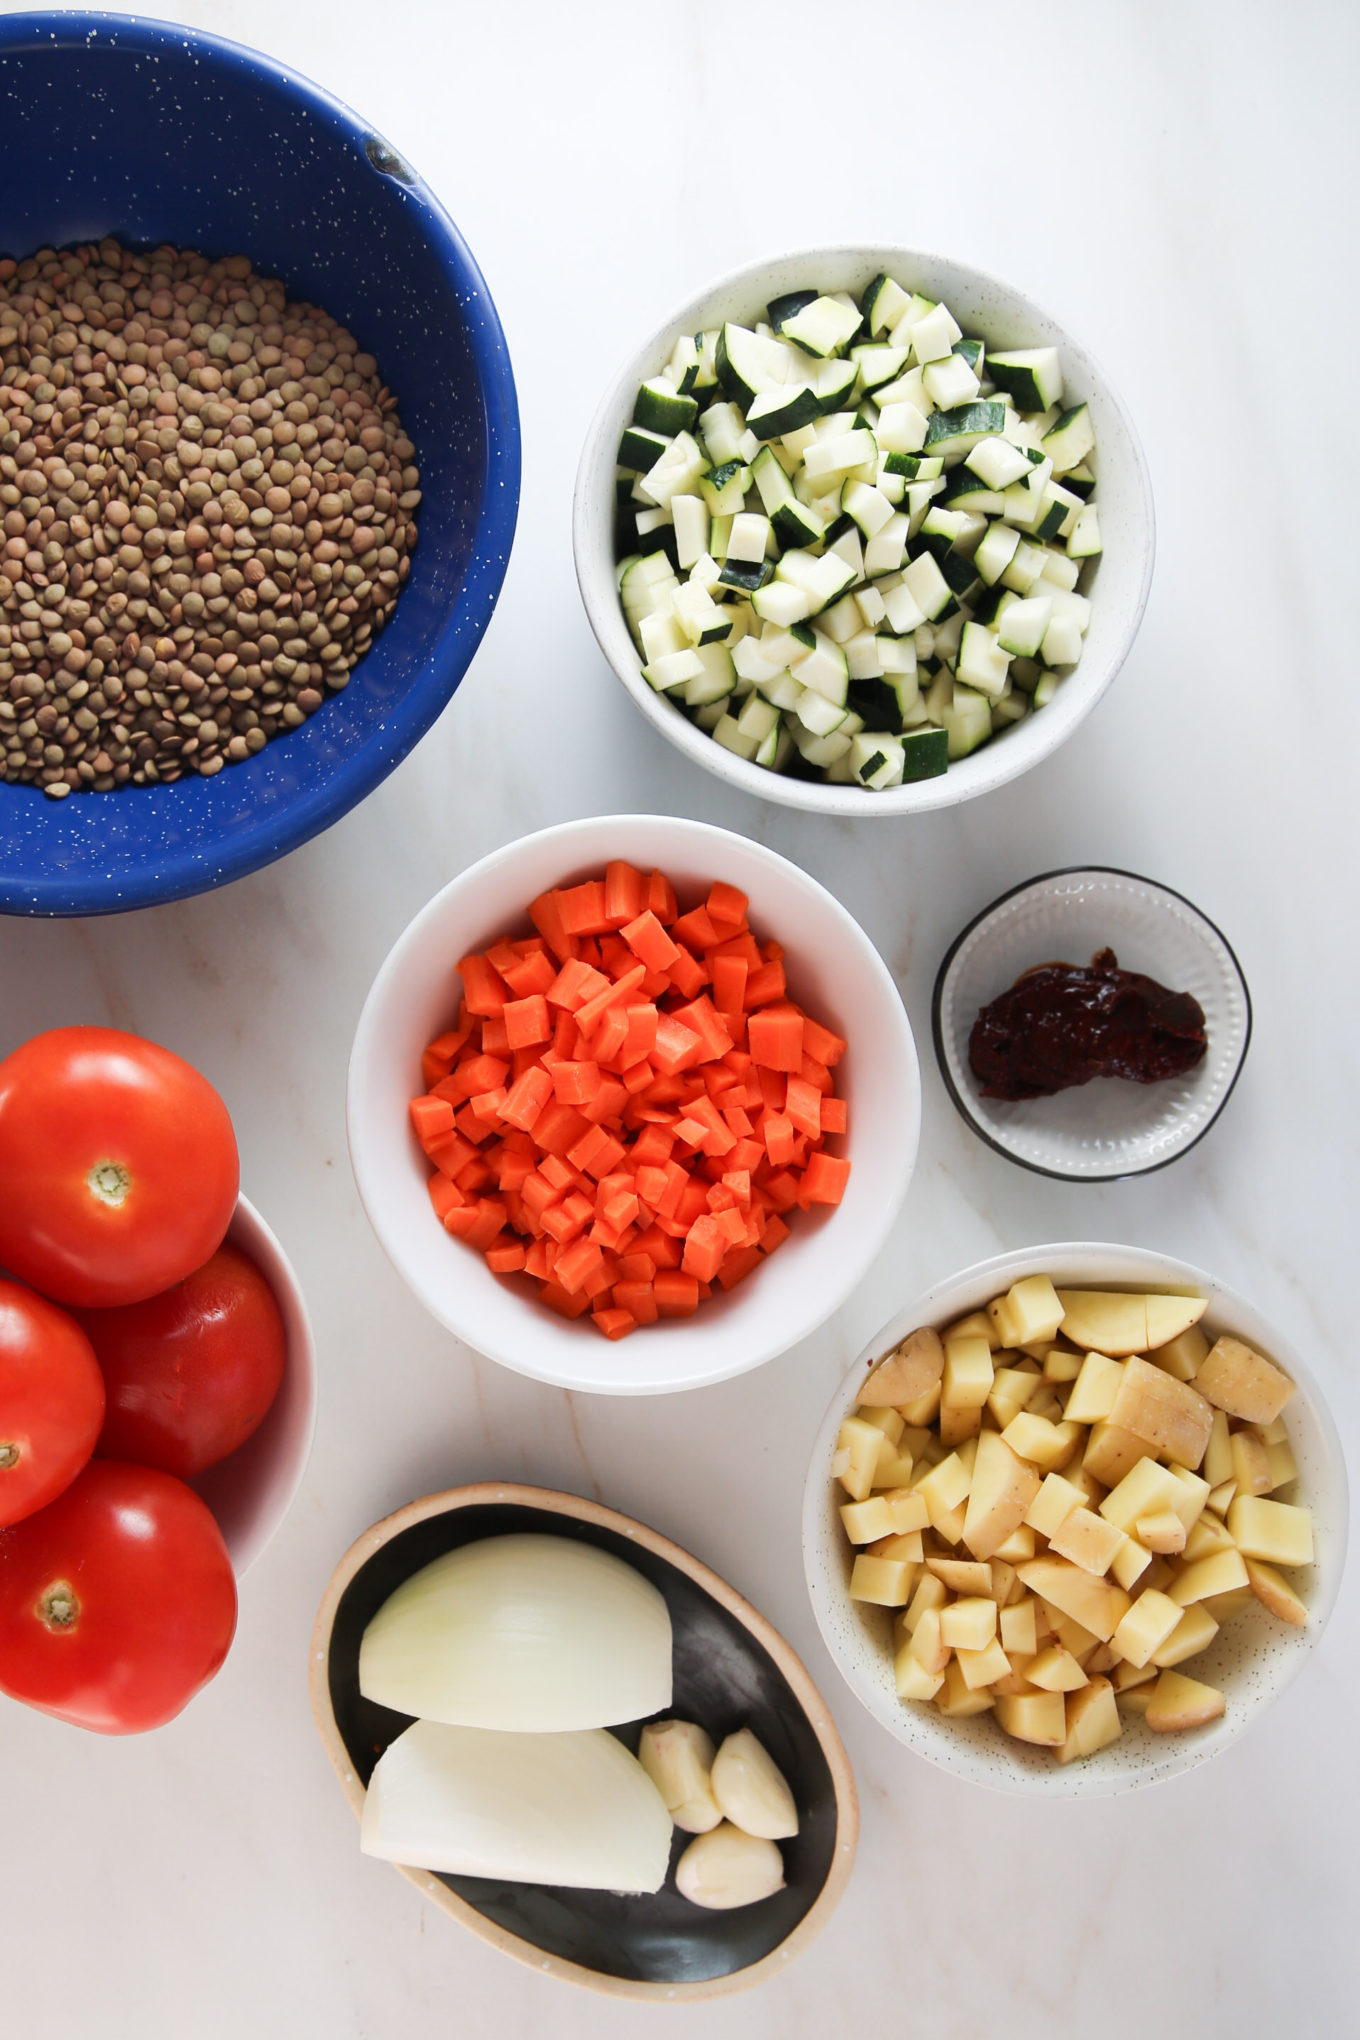 A table is filled with a colorful variety of vegetables, including lentils, for a delicious vegetarian dish.